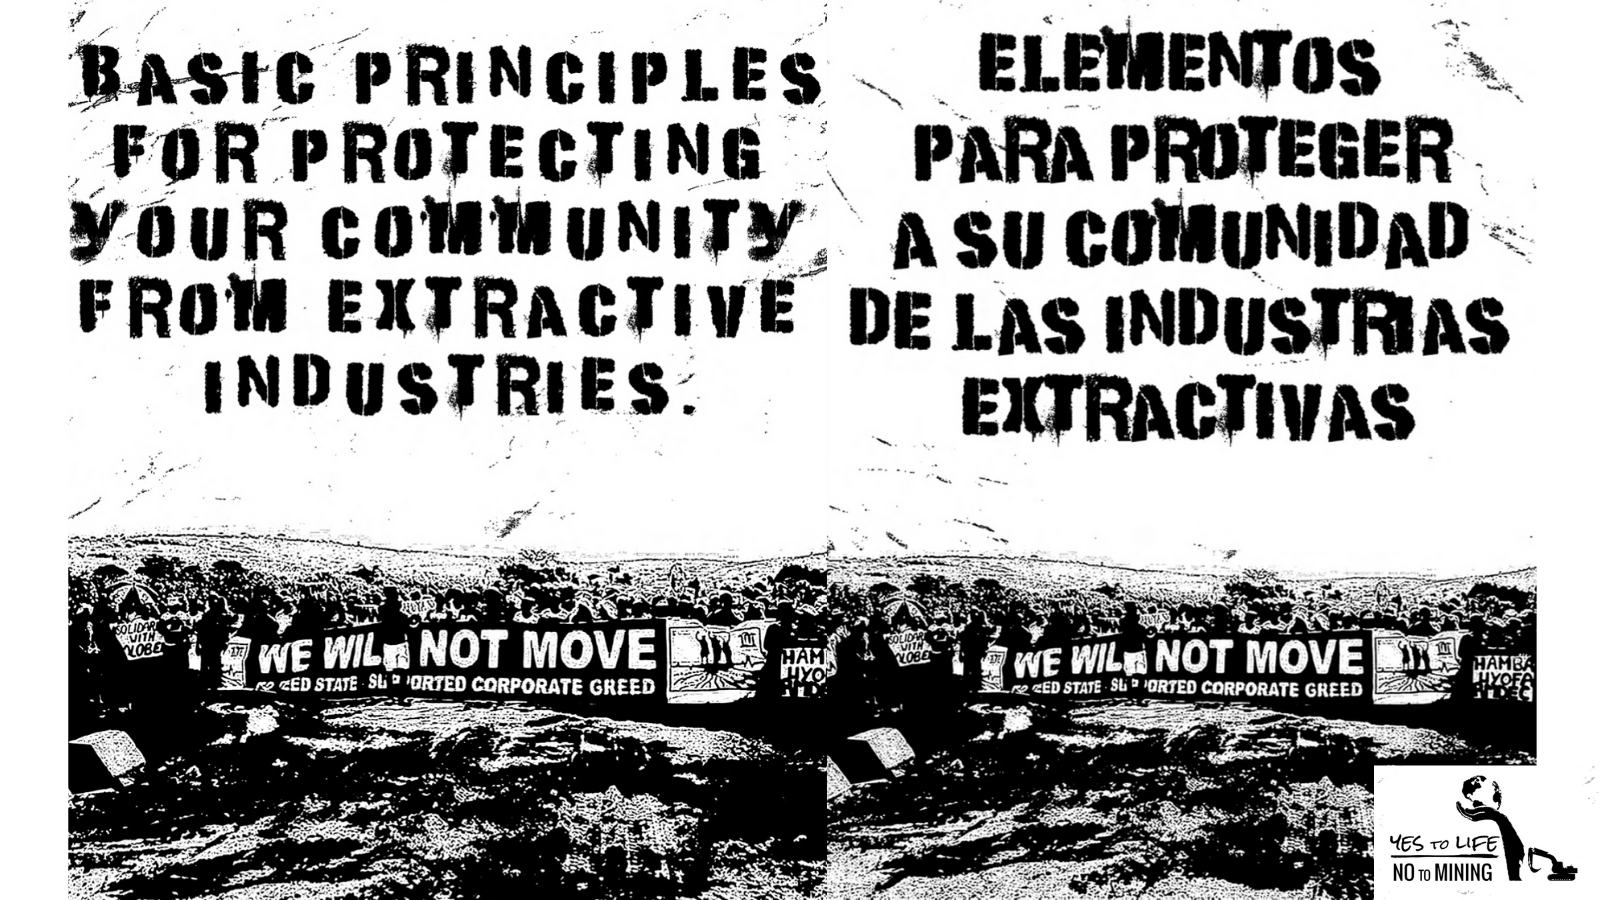 (English) Guide to resisting mining – new edition released on the Global Day Against Mega Mining